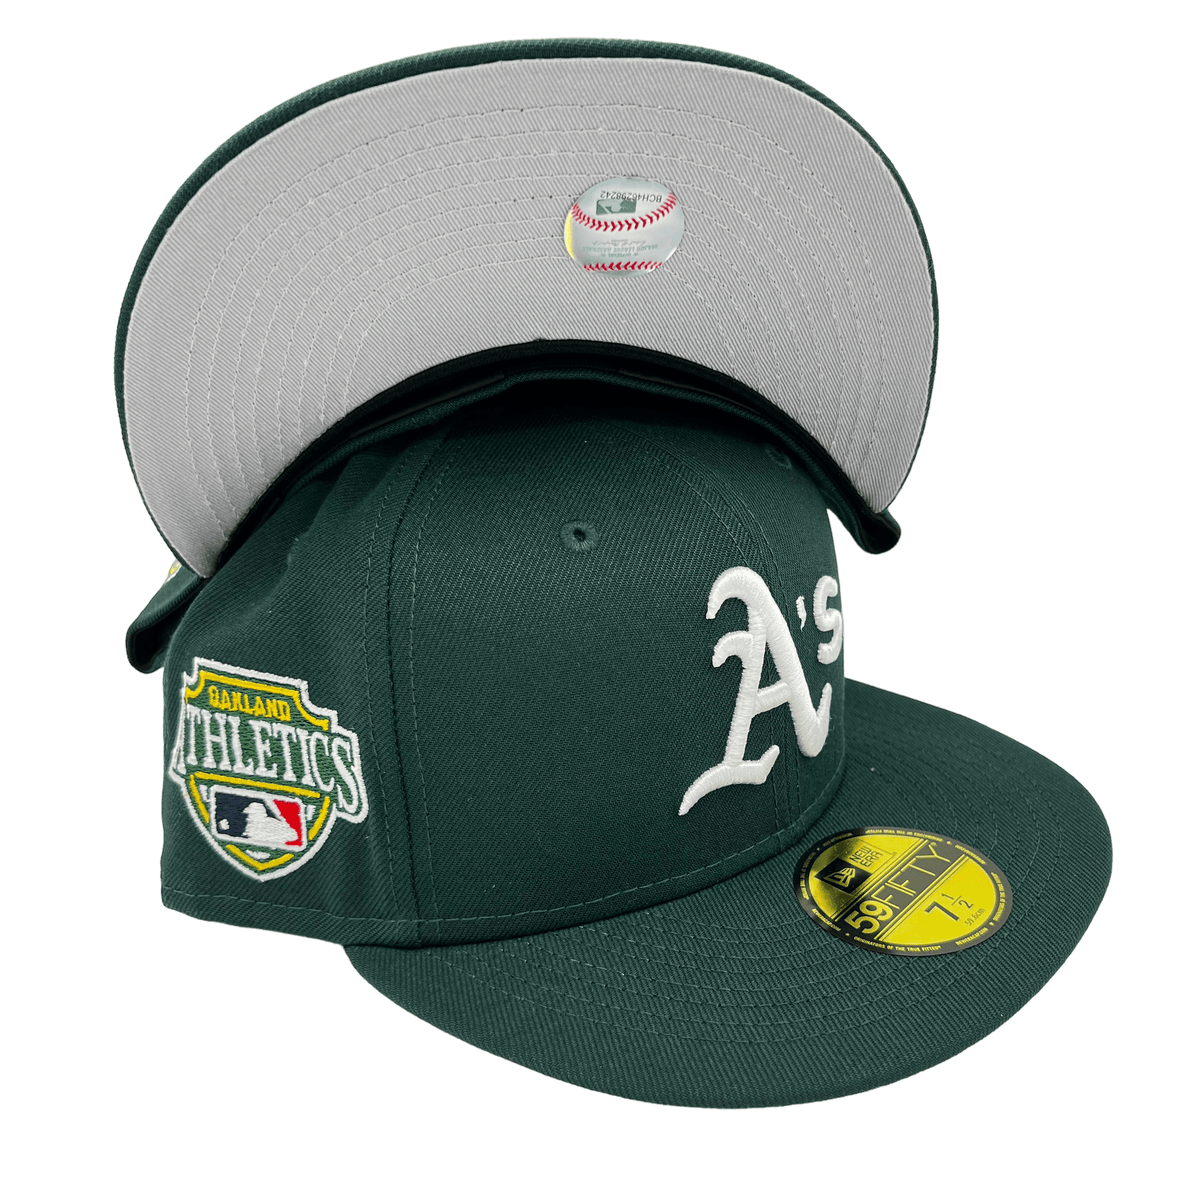 Oakland Athletics hat  Outfits with hats, Clothes design, Hat shop